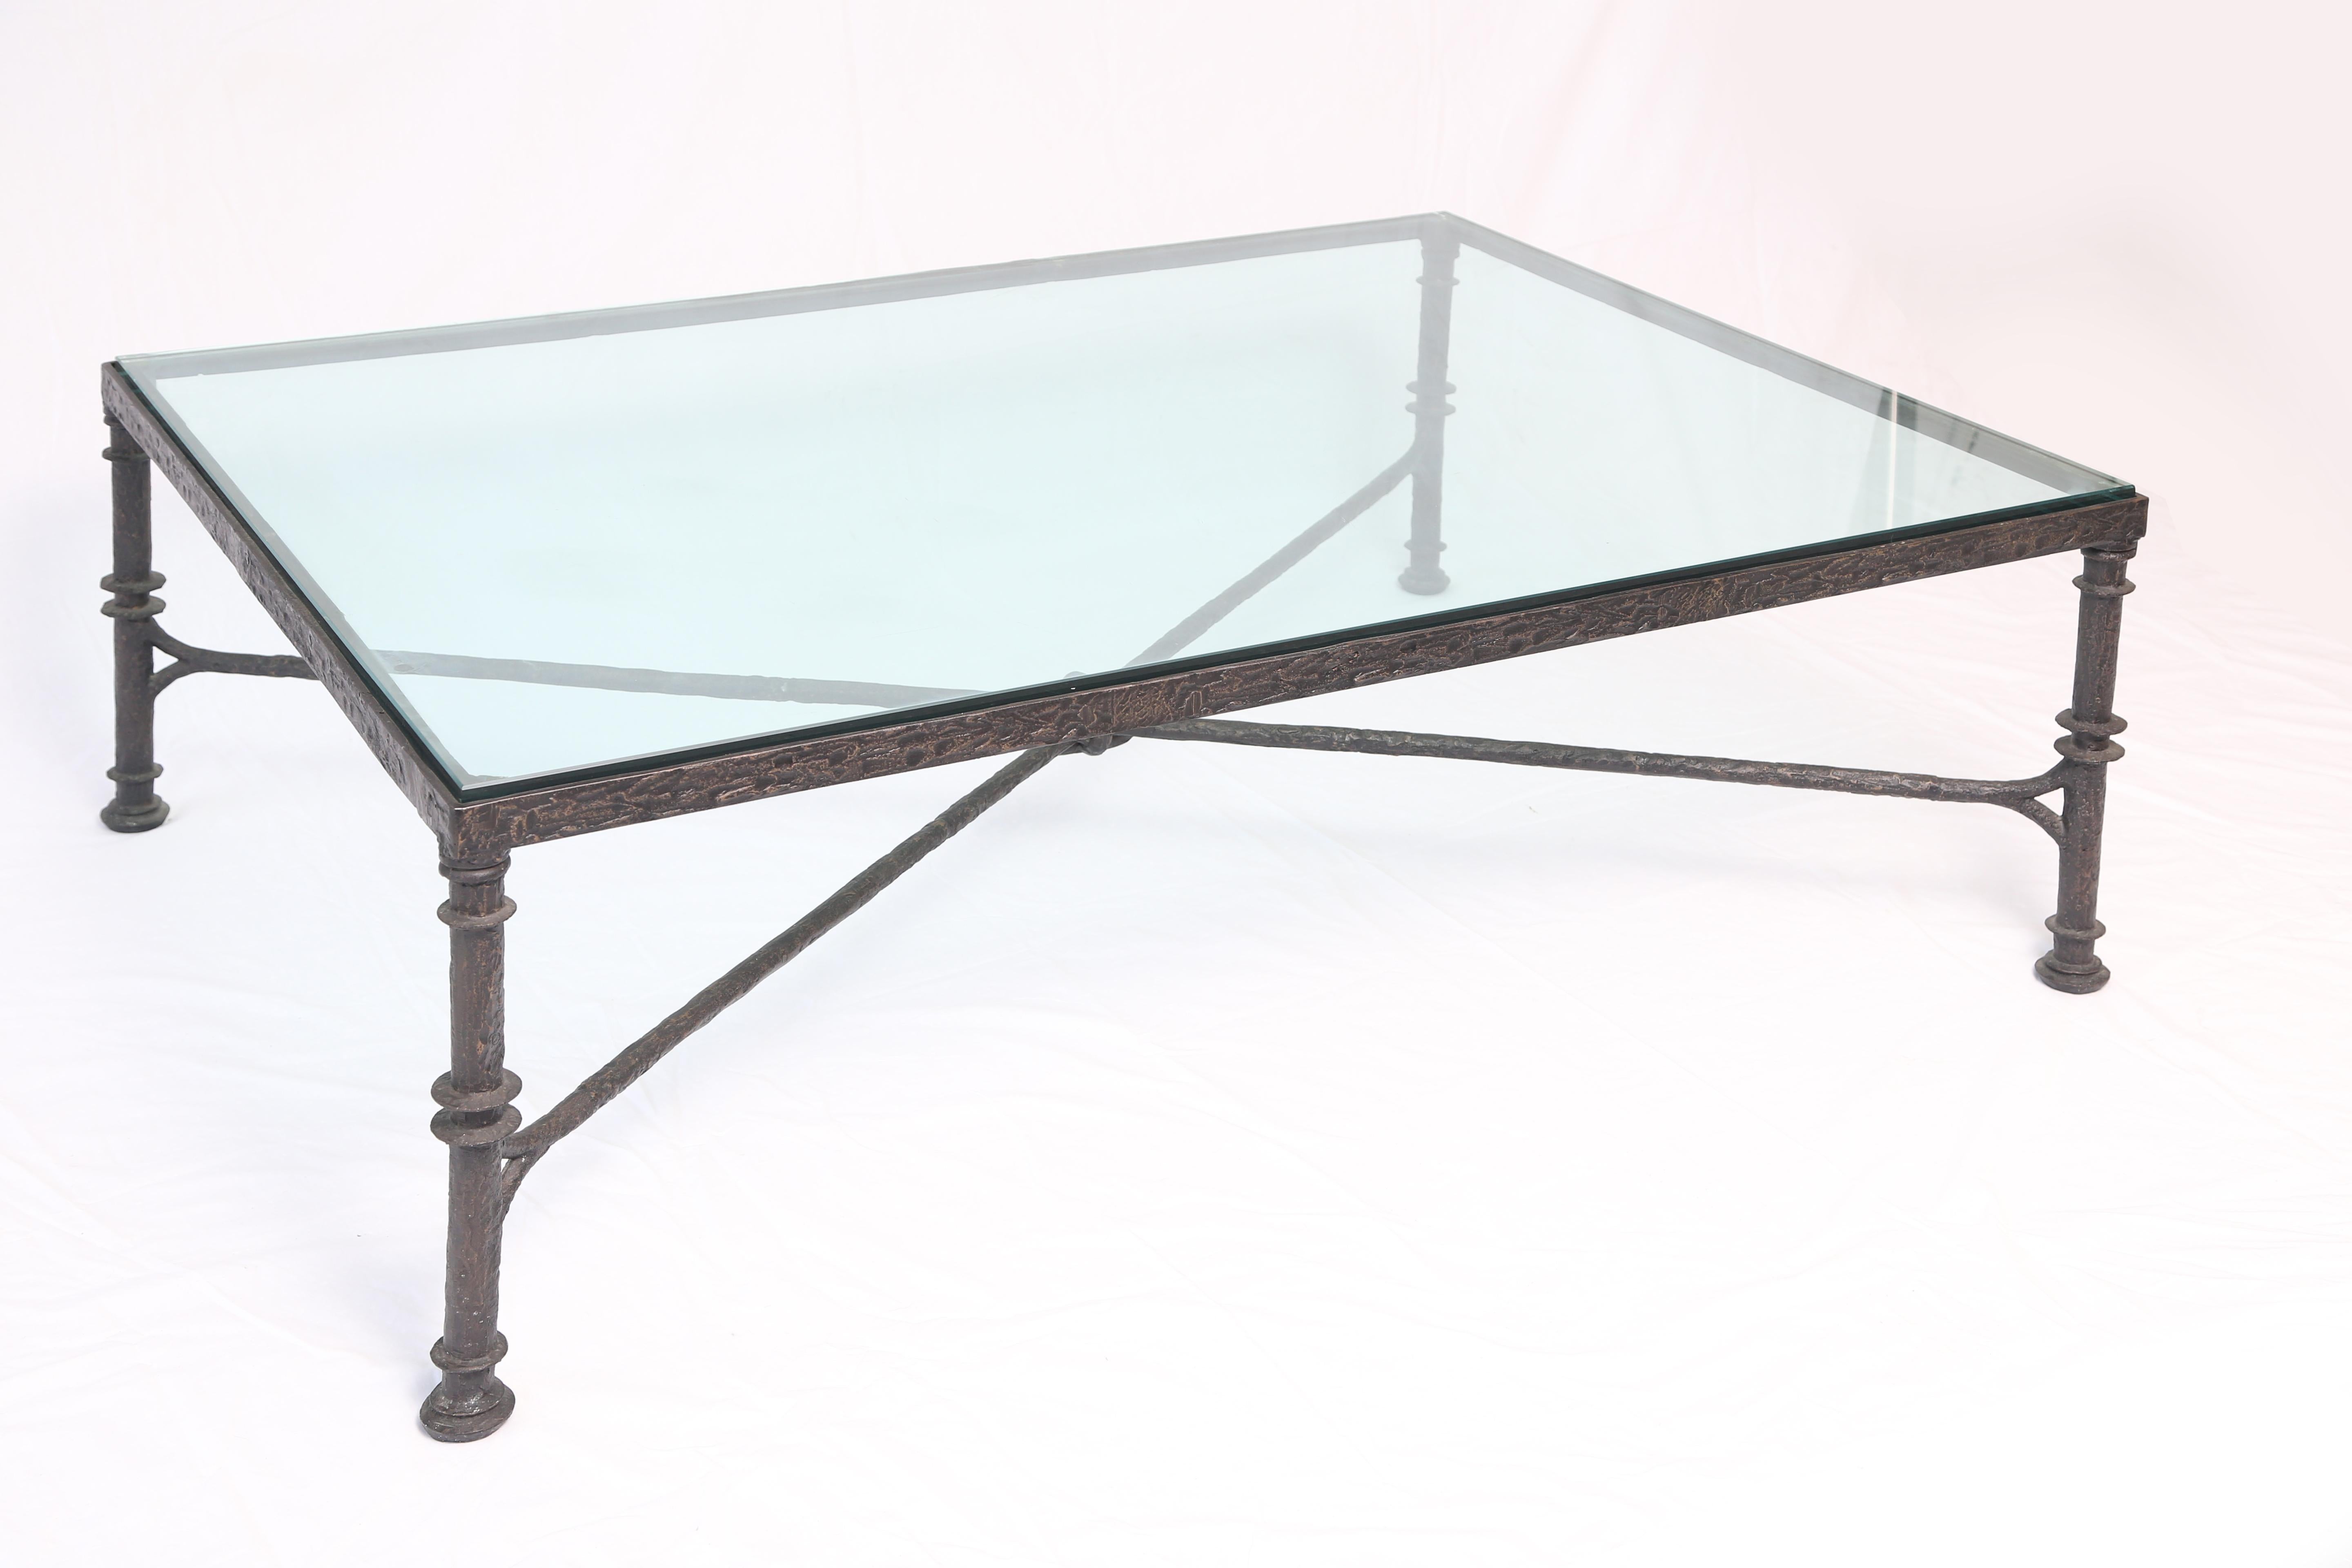 The rectangular glass top set within a conforming bronze base raised on round legs joined by an X-form stretcher with knot-details.